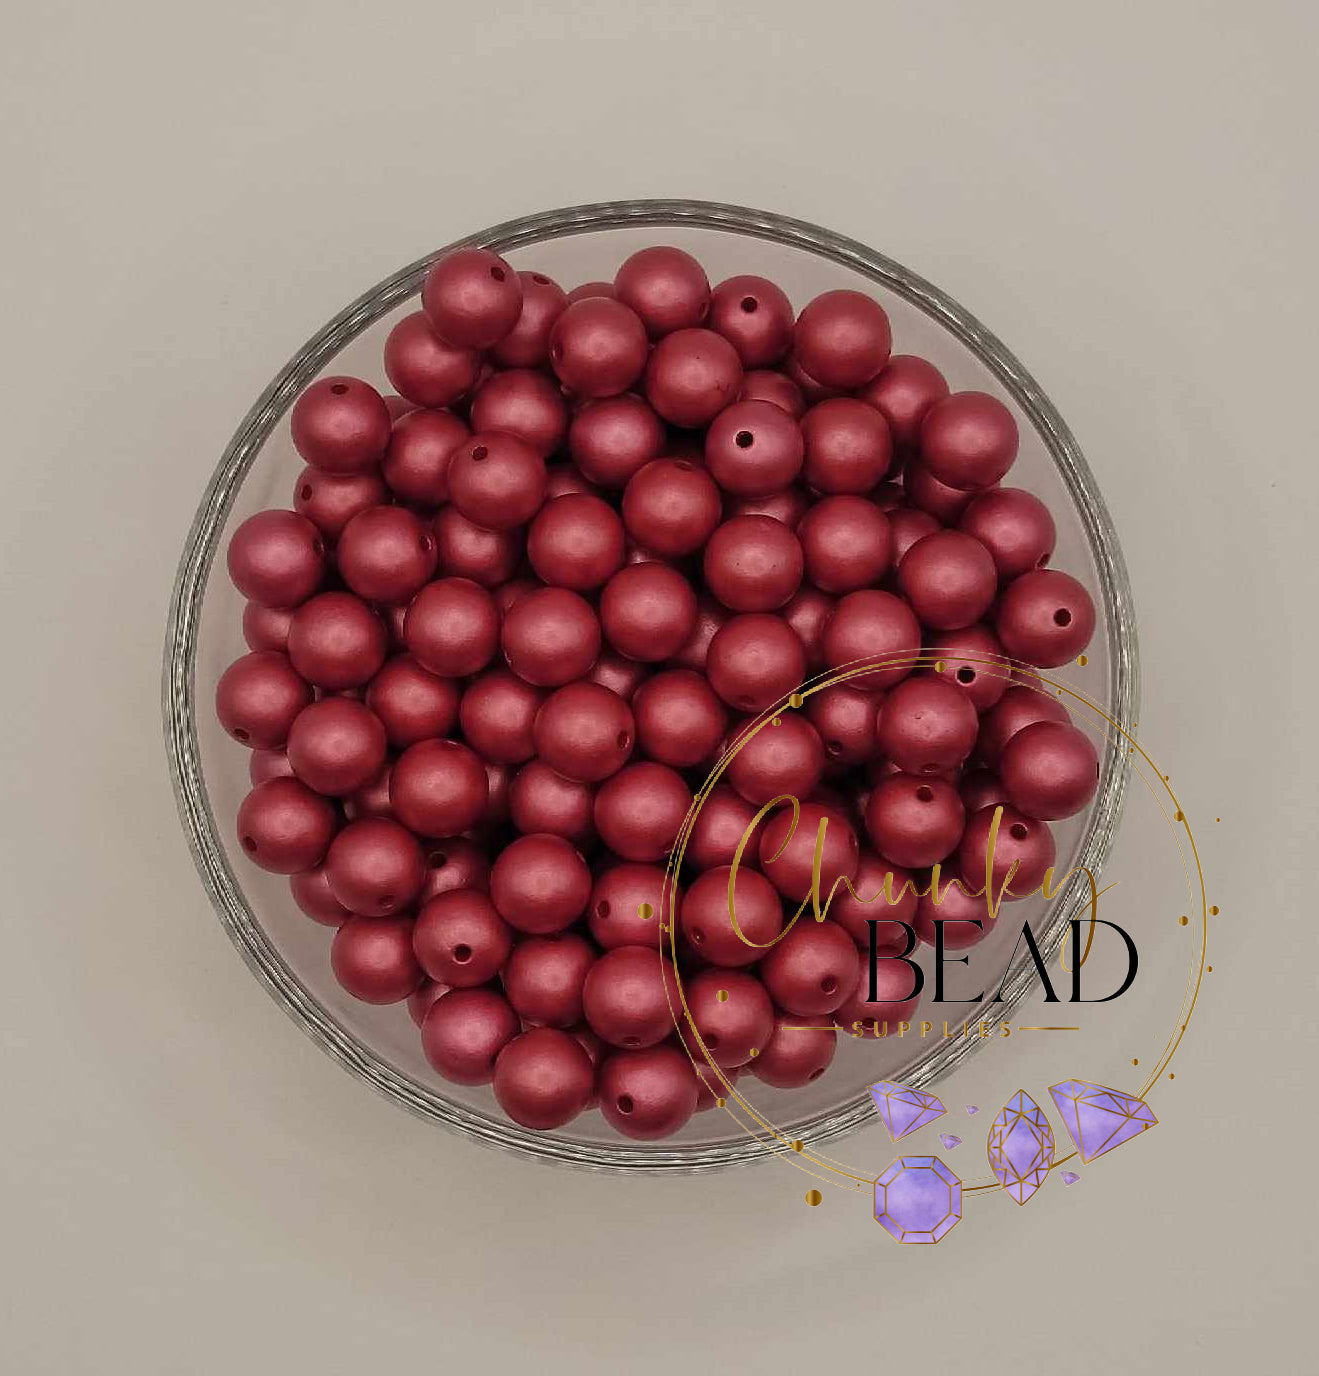 12mm “Red” Acrylic Matte Pearl Beads